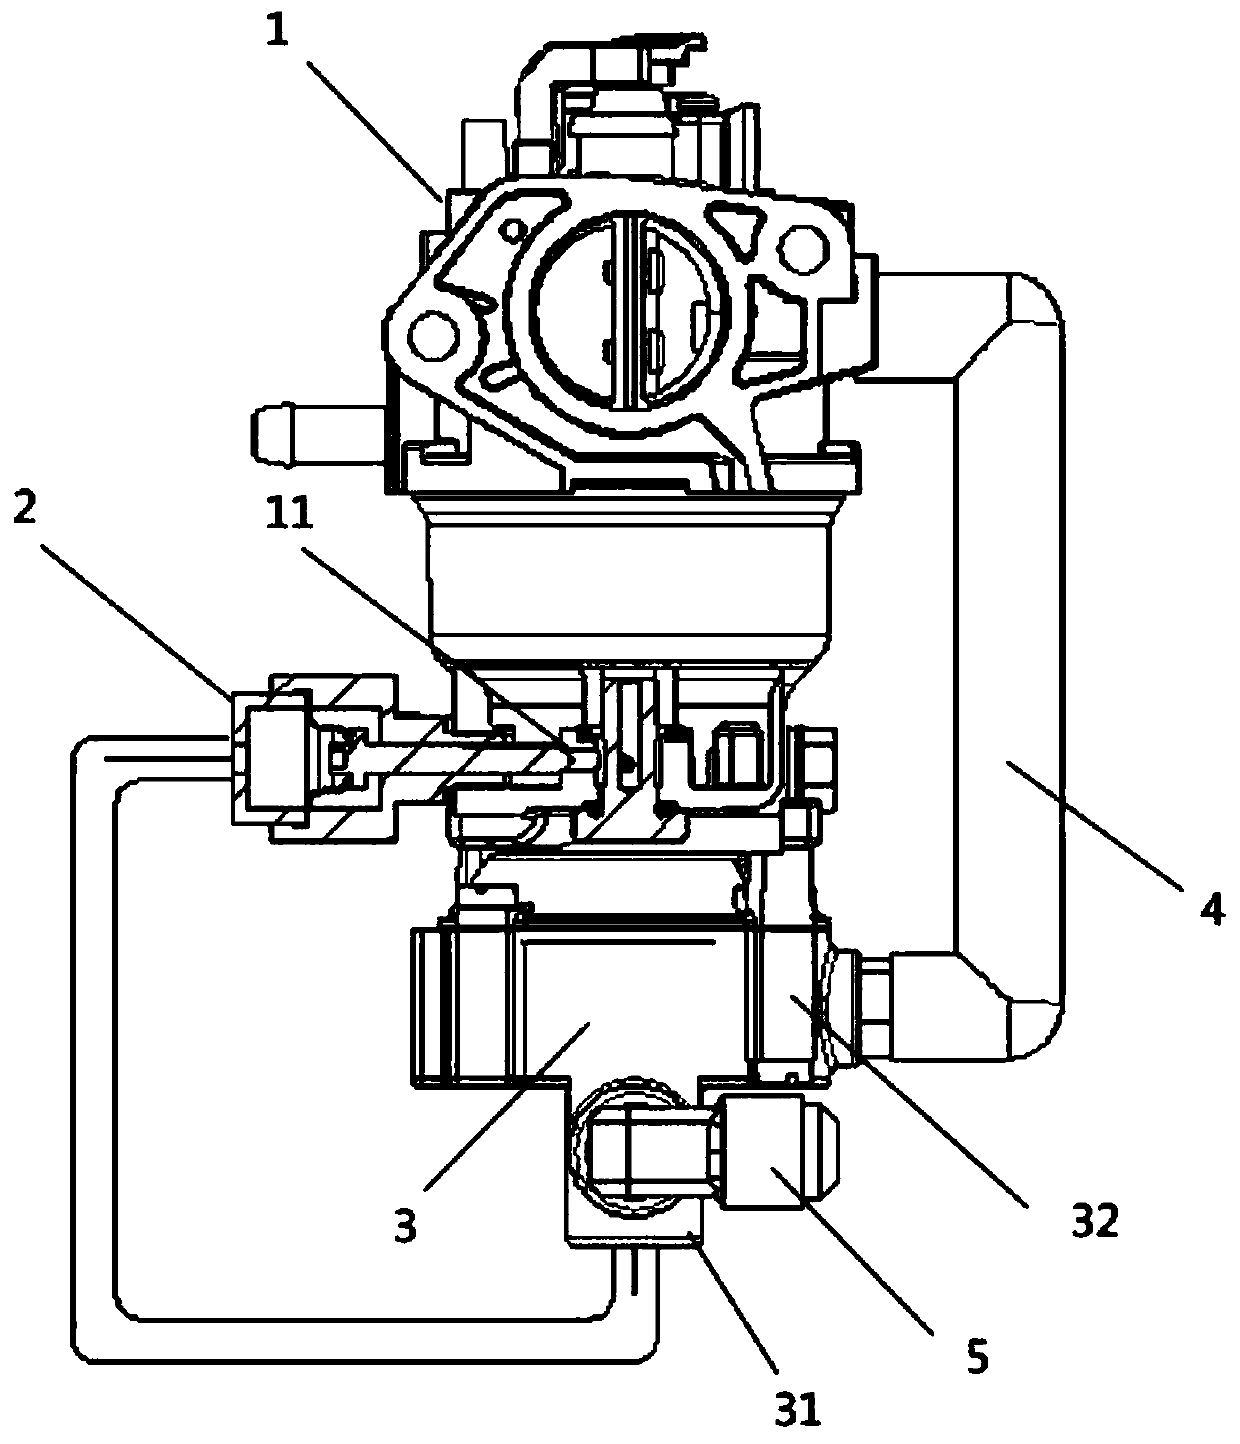 Dual-fuel automatic switching mechanism